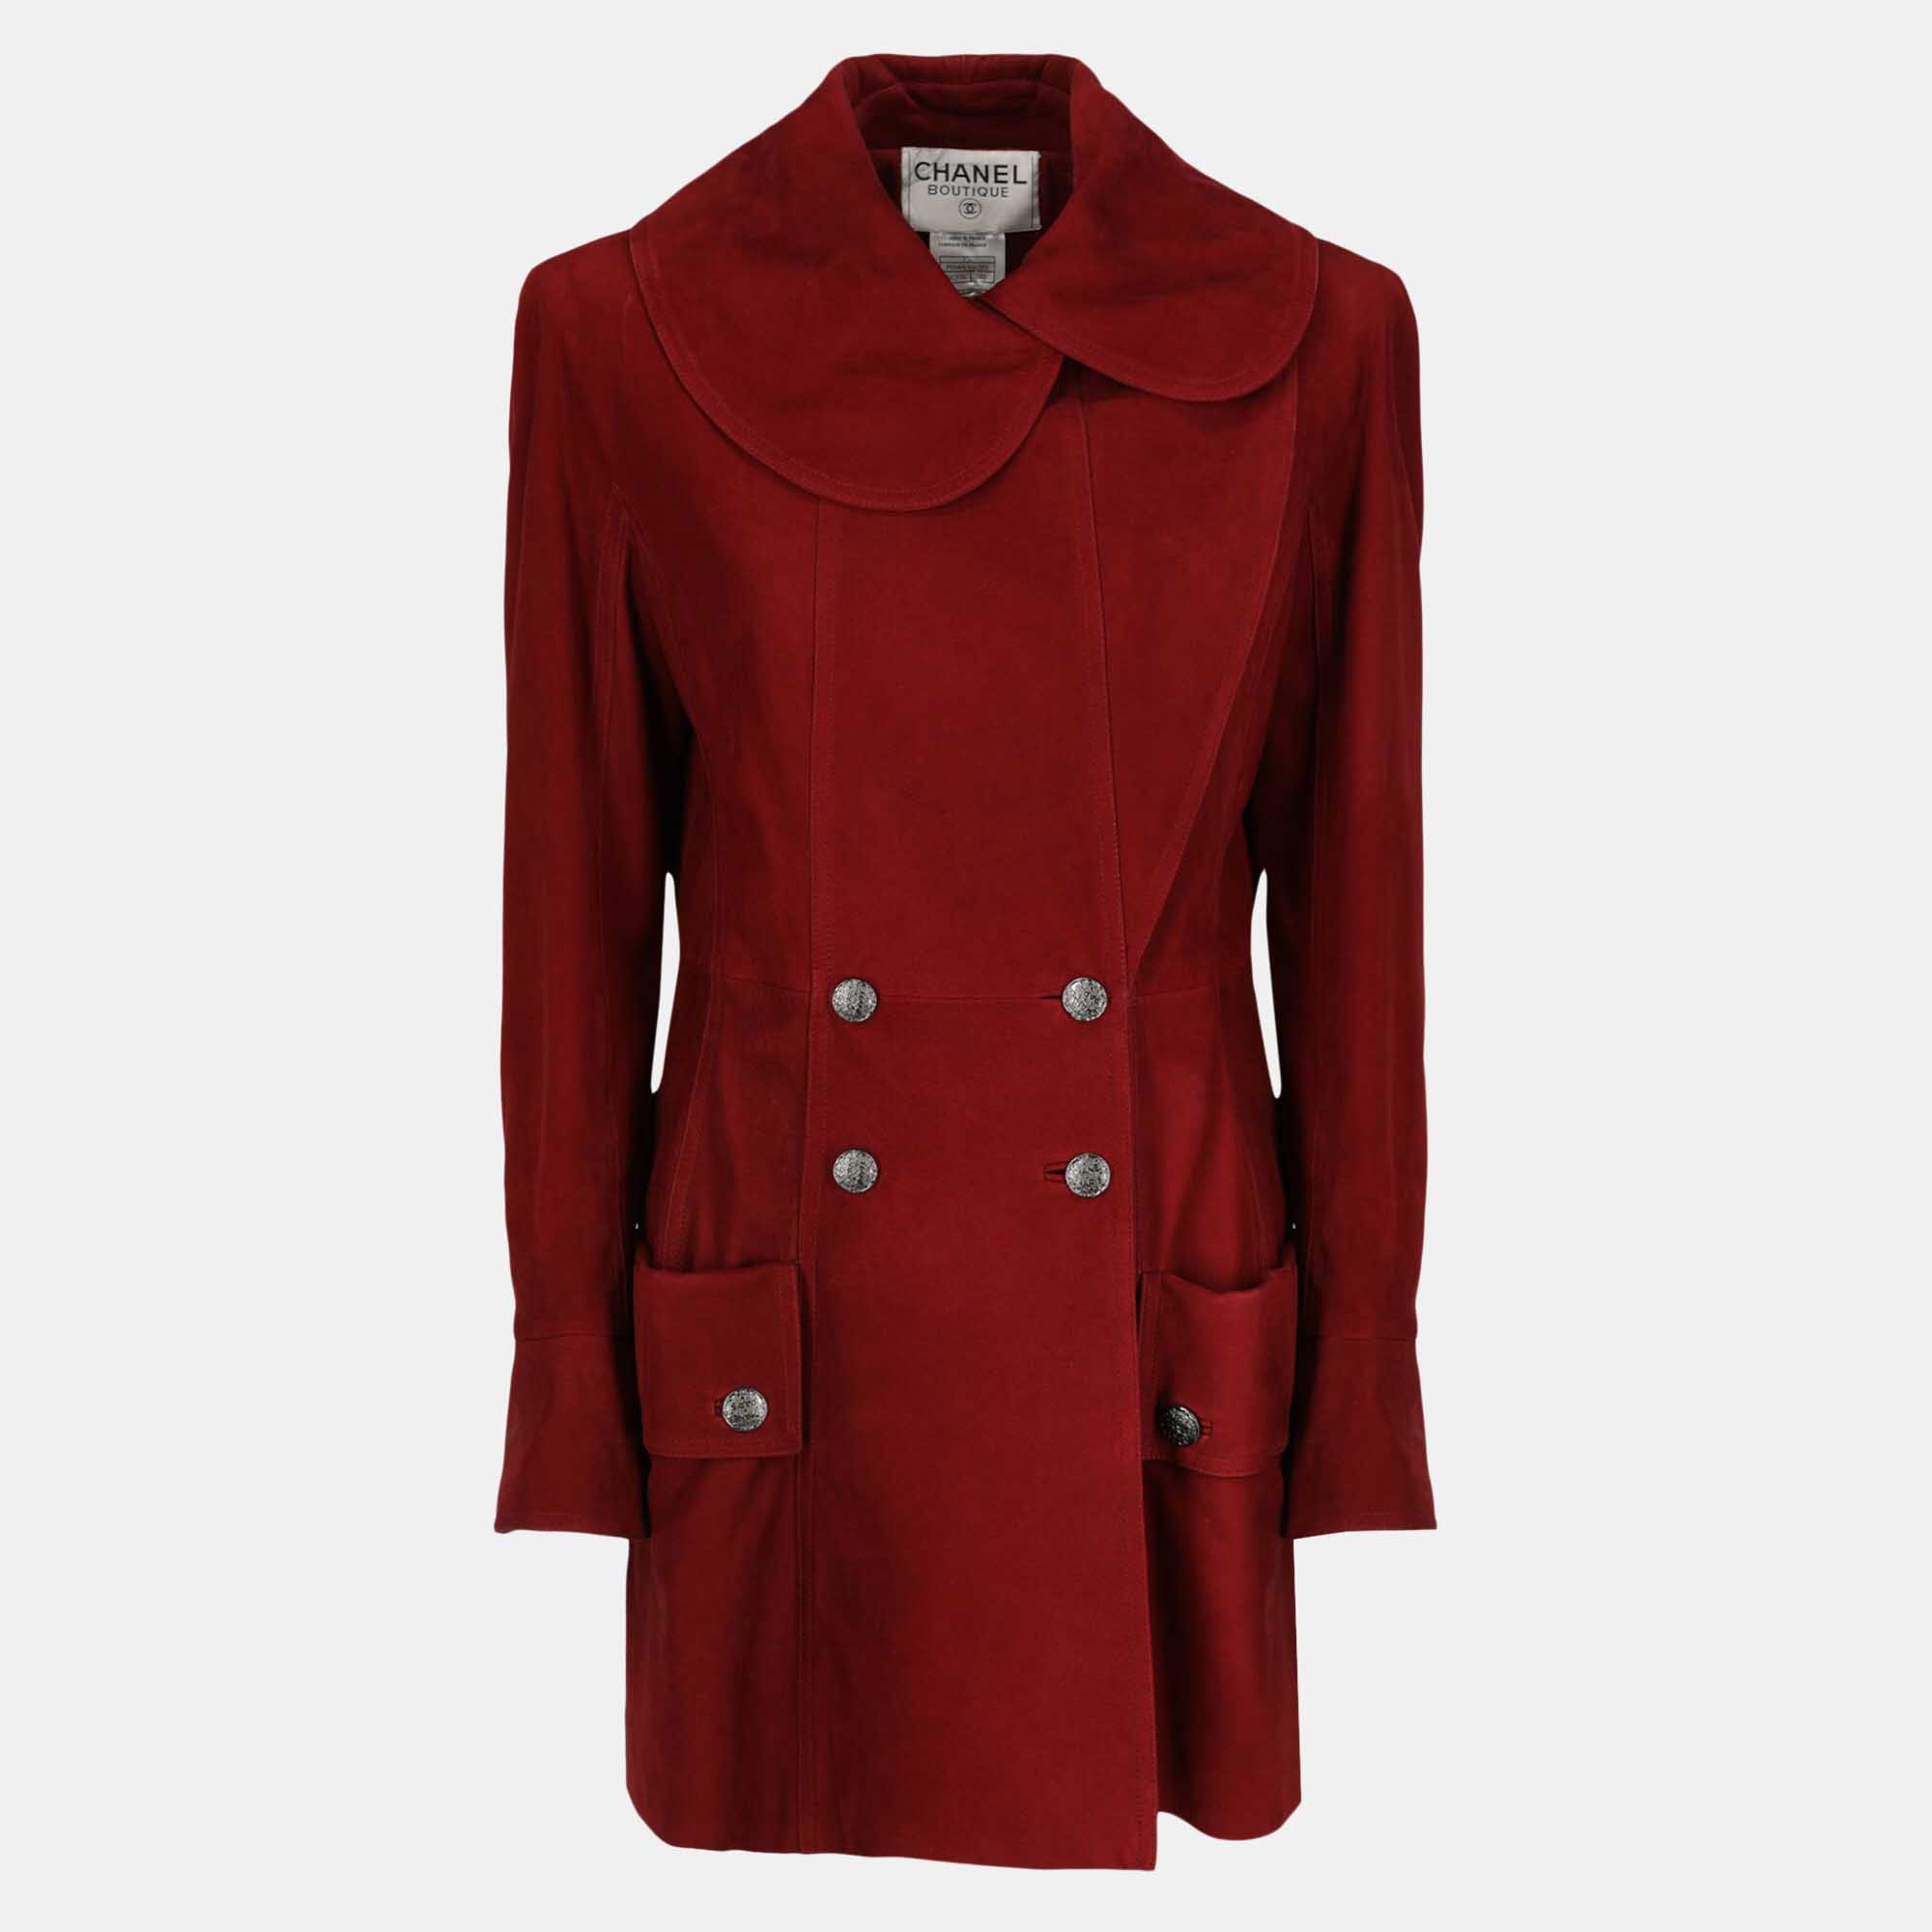 Chanel  Women's Leather Double Breasted Coat - Burgundy - L